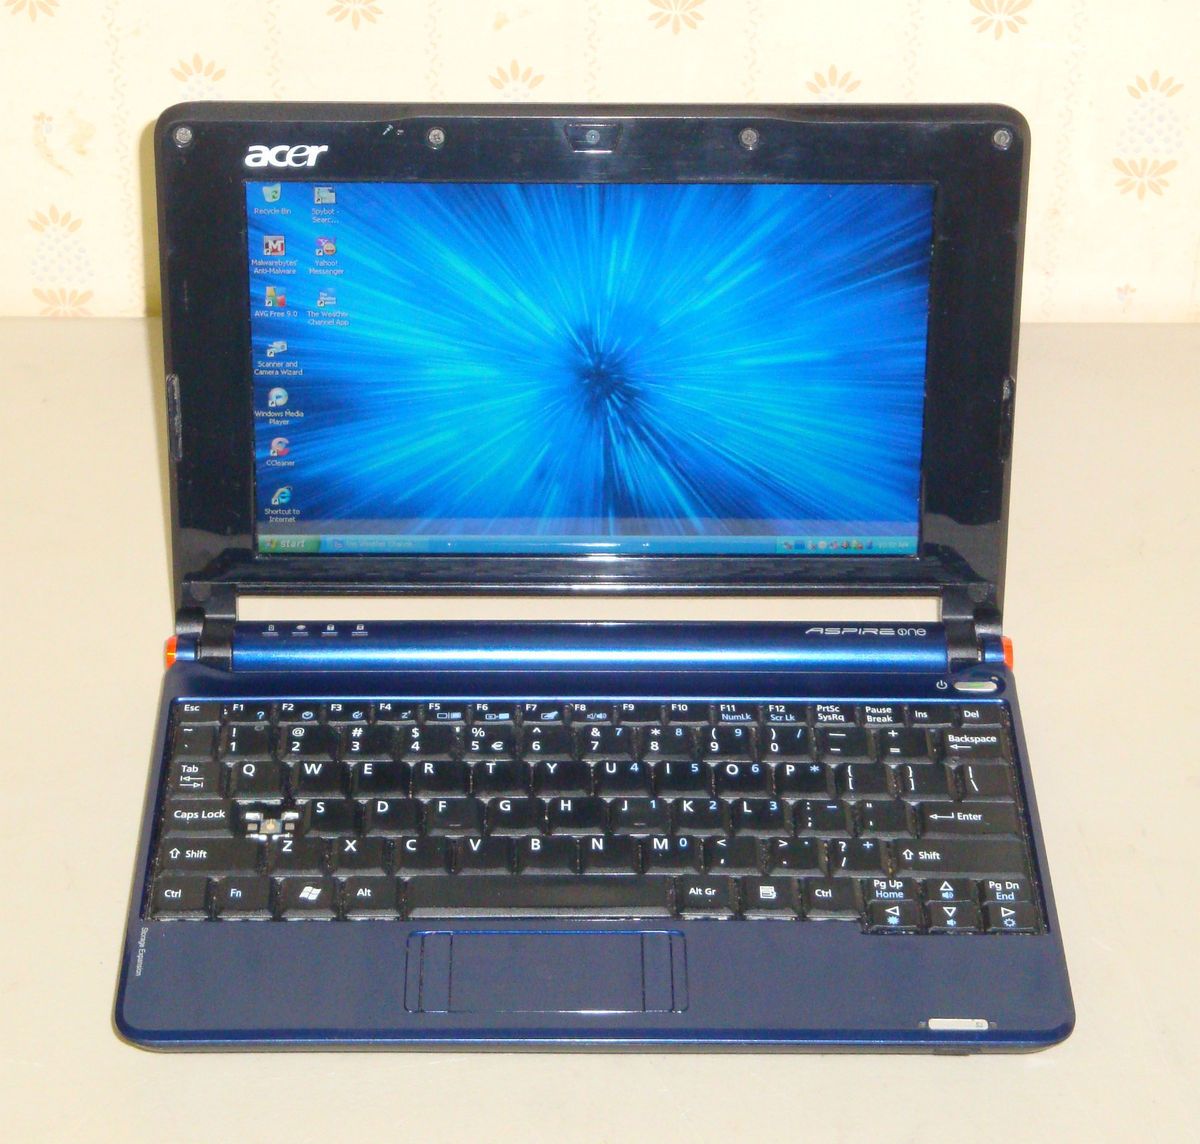 Acer Aspire One Series ZG5 Netbook PC Laptop Computer